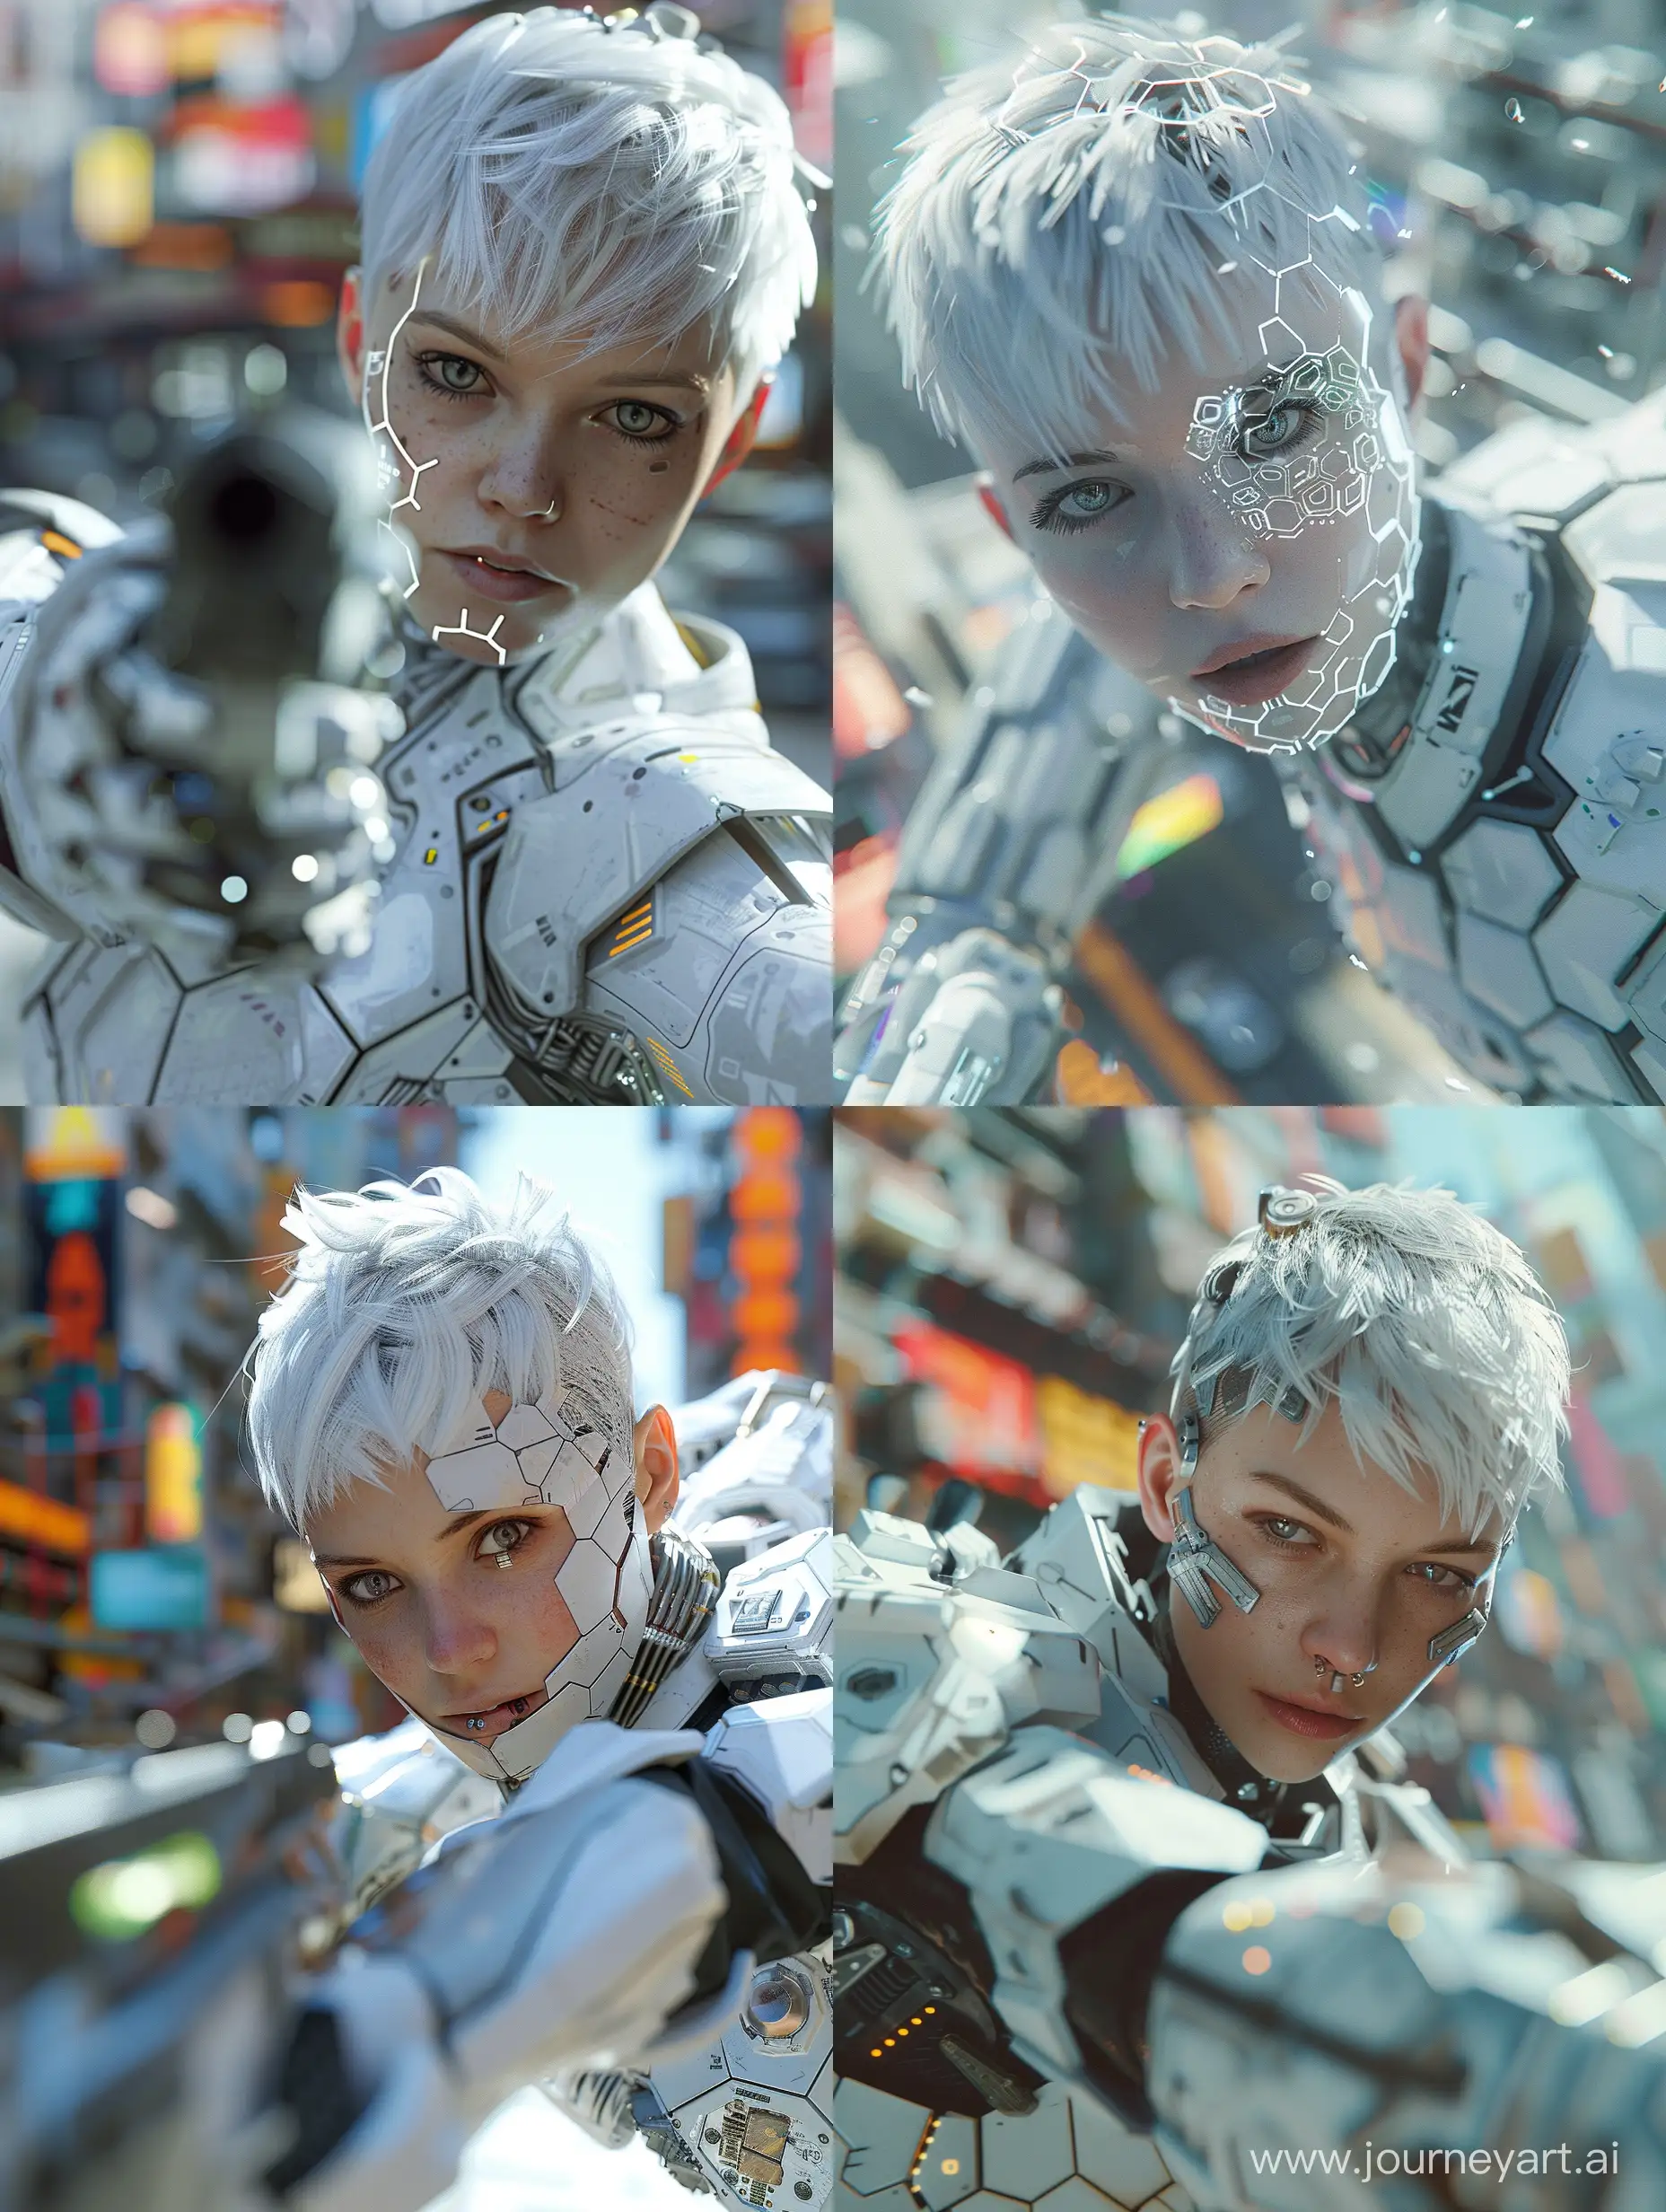 a  close up super high quality,high definition, high resolution, high detail cinematic worm view dynamic scene where a cyberpunk female with short frost white hair and  enhancement face tech aiming towards the viewer and The armor she is wearing is  revealing the hexagonal white armor which is adorned with intricate detailing, seamlessly integrating advanced technological enhancements on the armour,blurry background of vibrant contemporary city during daylight,Volumetric lighting casts dramatic shadows, enhancing the ultra-realistic cinematography and creating a contrast between the female and the environment. The scene is full of details and oddities as well as reflections, glows, The scene is rendered in a realistic style, with high definition, high resolution, and high detail.
